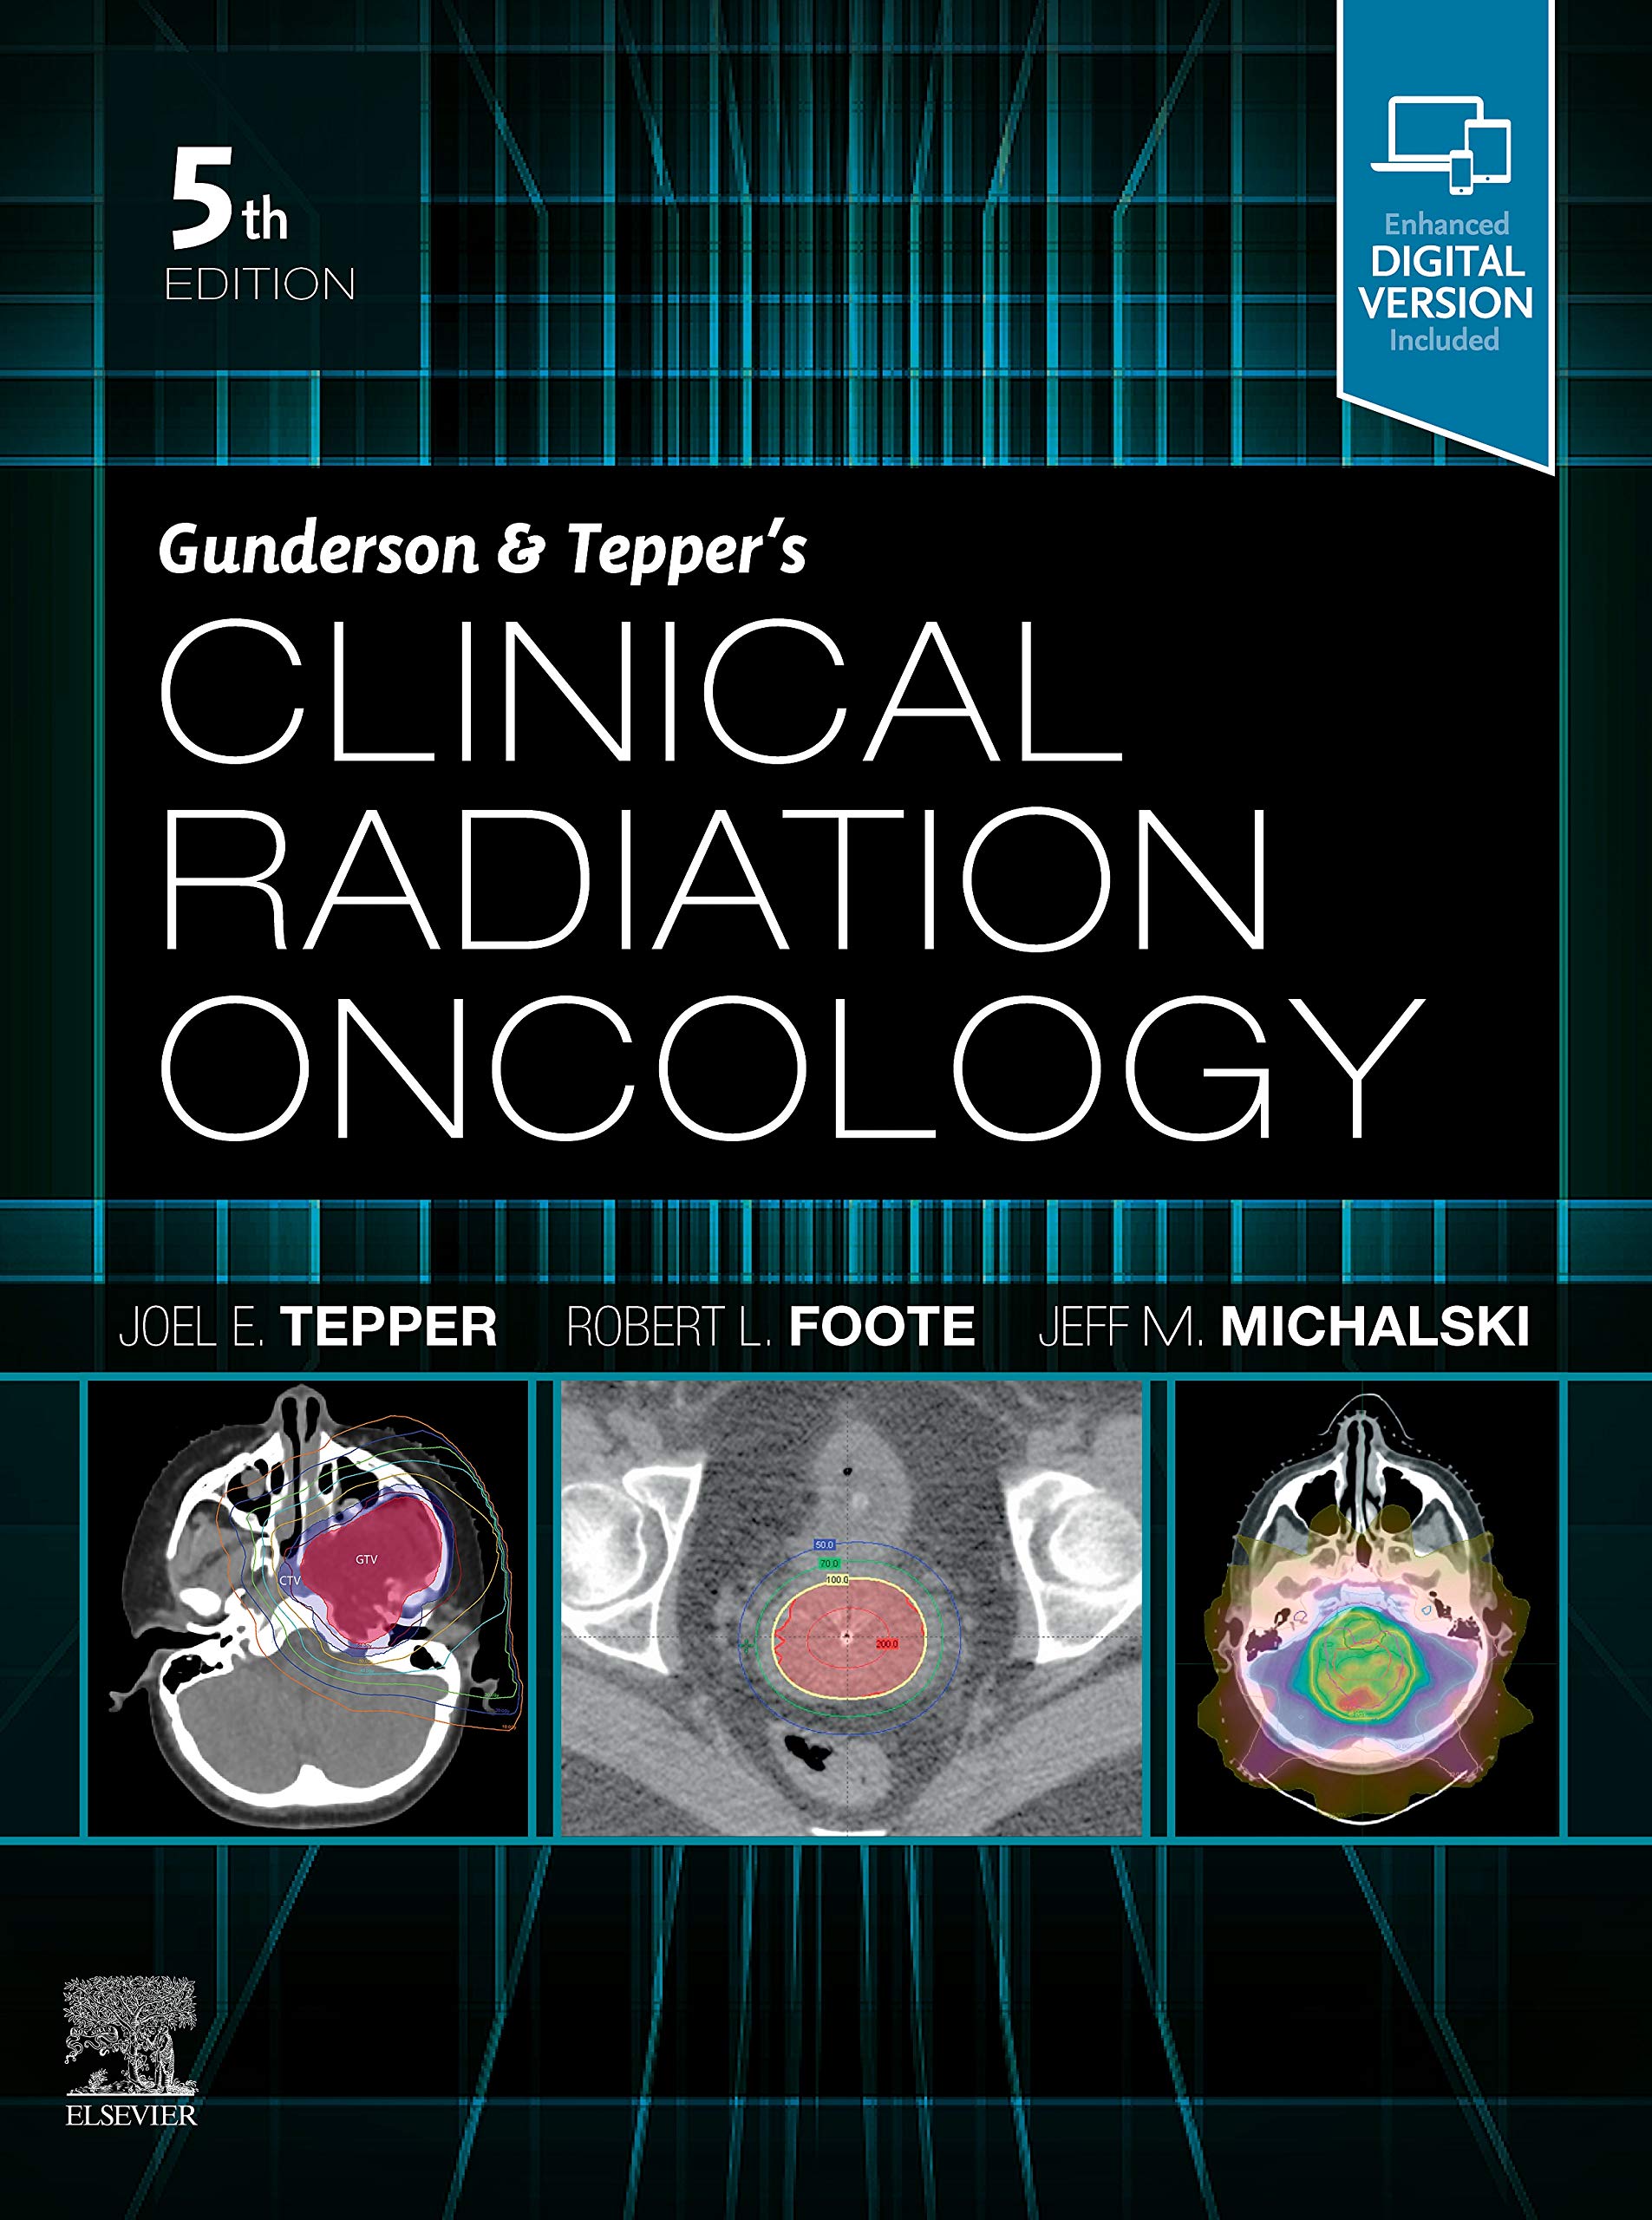 Gunderson and Tepper’s Clinical Radiation Oncology, 5E